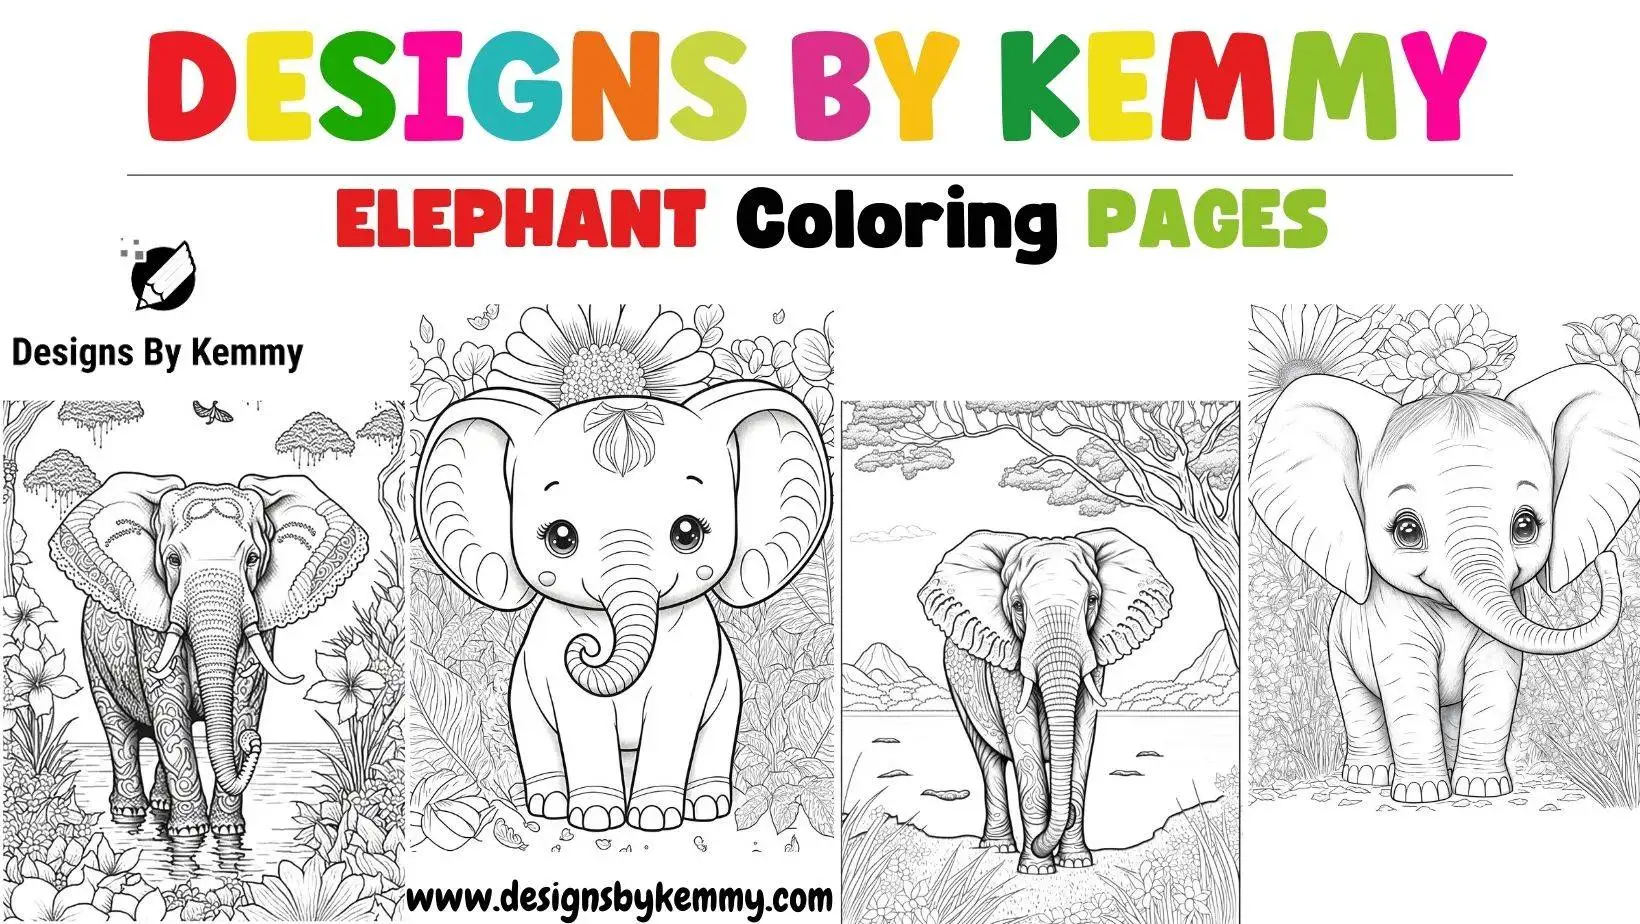 Elephant coloring pages for adults